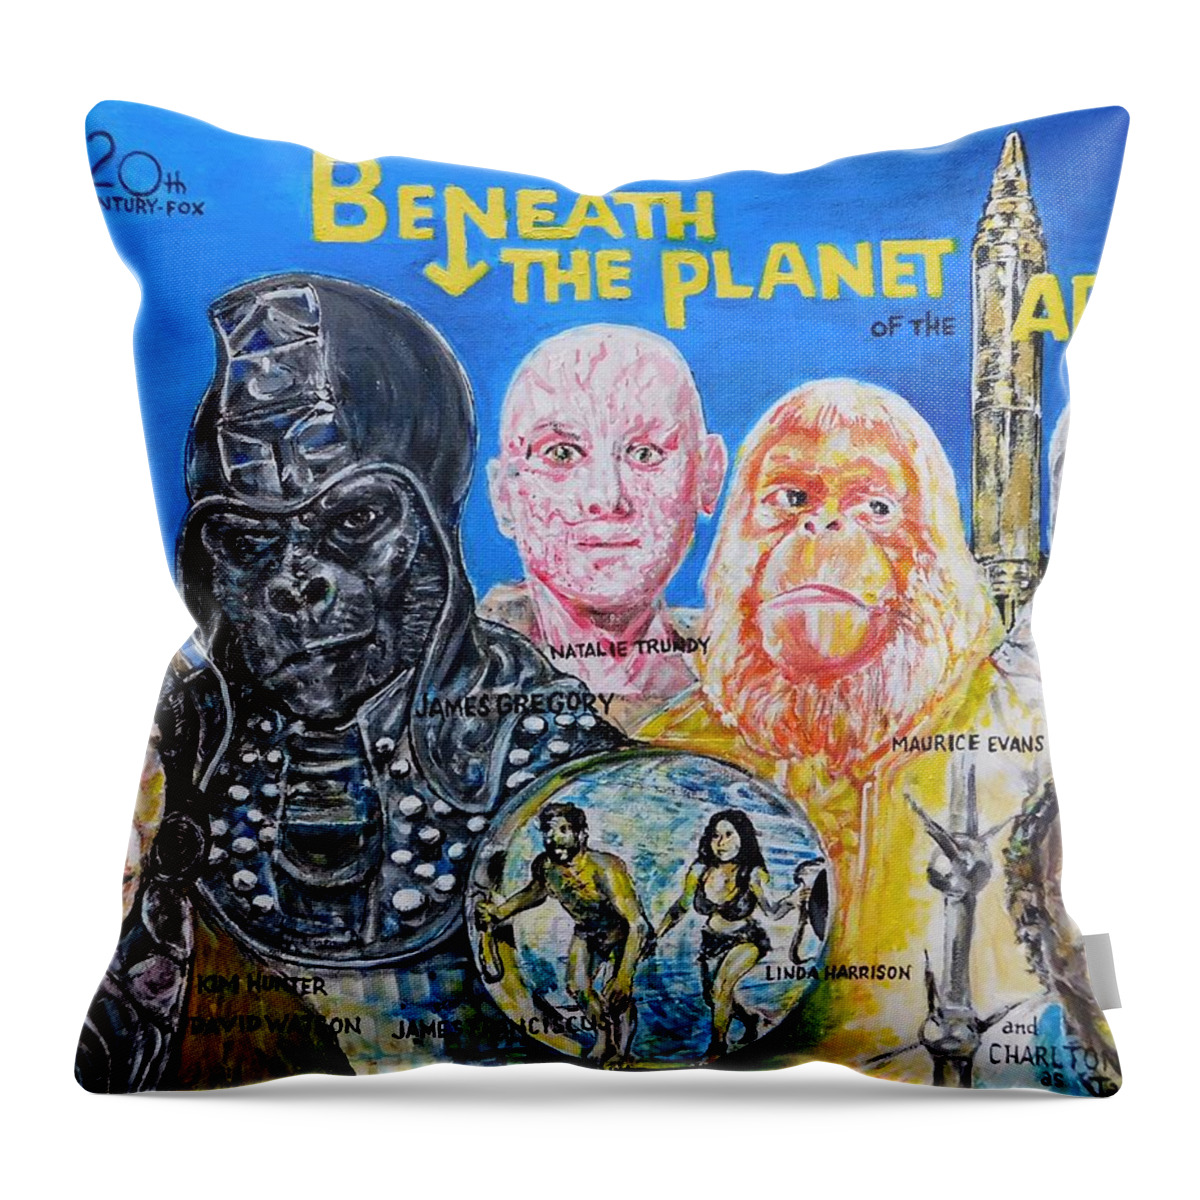 Planet Of The Apes Beneath The Plane To Fthe Apes Arthur P Jacobs Charlton Heston James Gregory Victo Rbuono James Franciscus Kim Hunter Linda Harrison Zira Cornelius Dr.zaius General Ursus Science Fiction 1970 20th Century Fox Hollywood California 1970 Throw Pillow featuring the painting Beneath The Planet Of The Apes - 1970 Lobby Card that Never Was by Jonathan Morrill